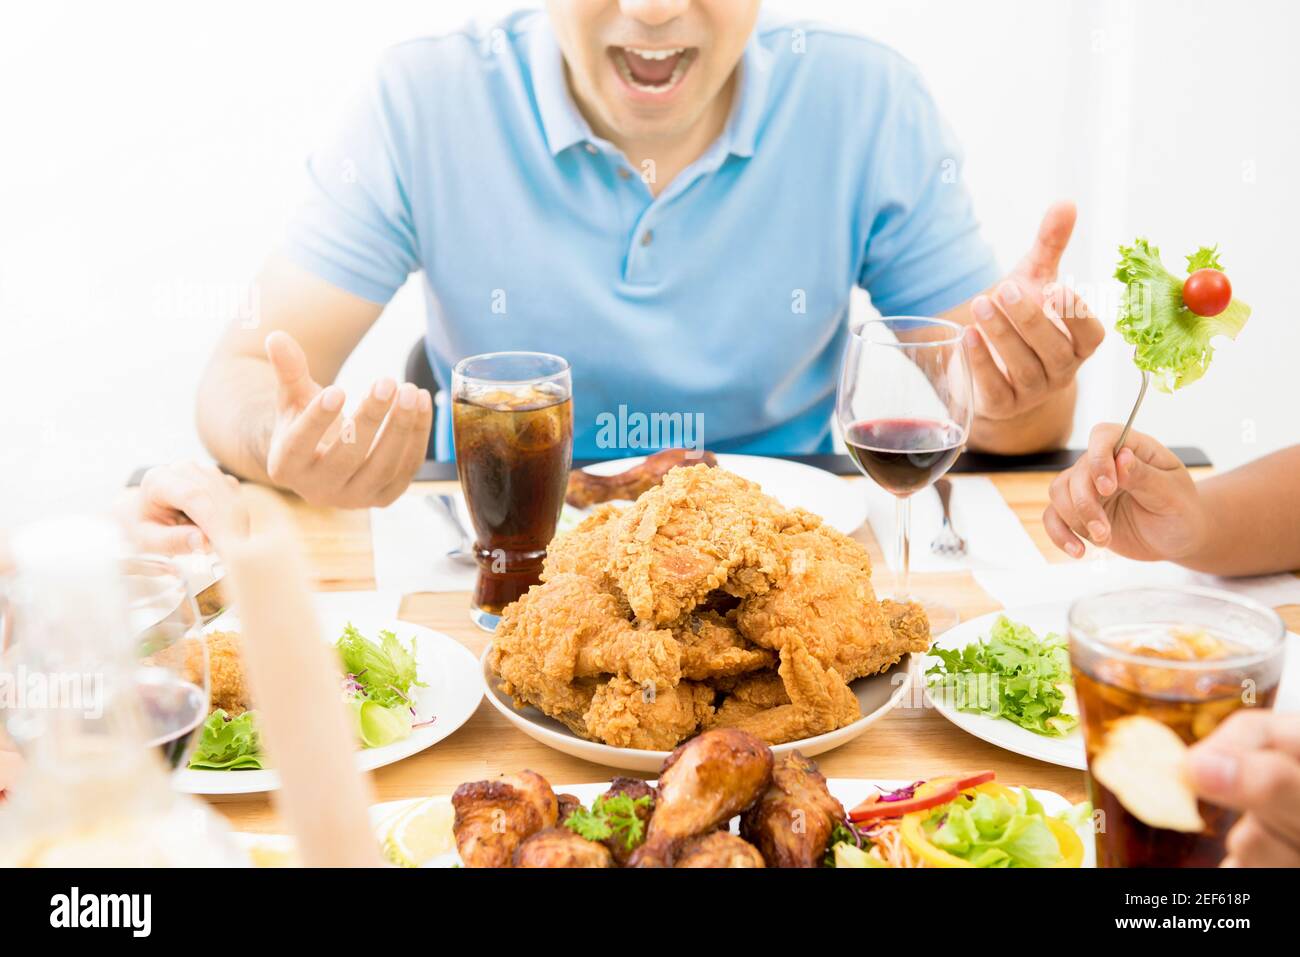 Food and drinks on dining table in front of excited hungry young man Stock Photo